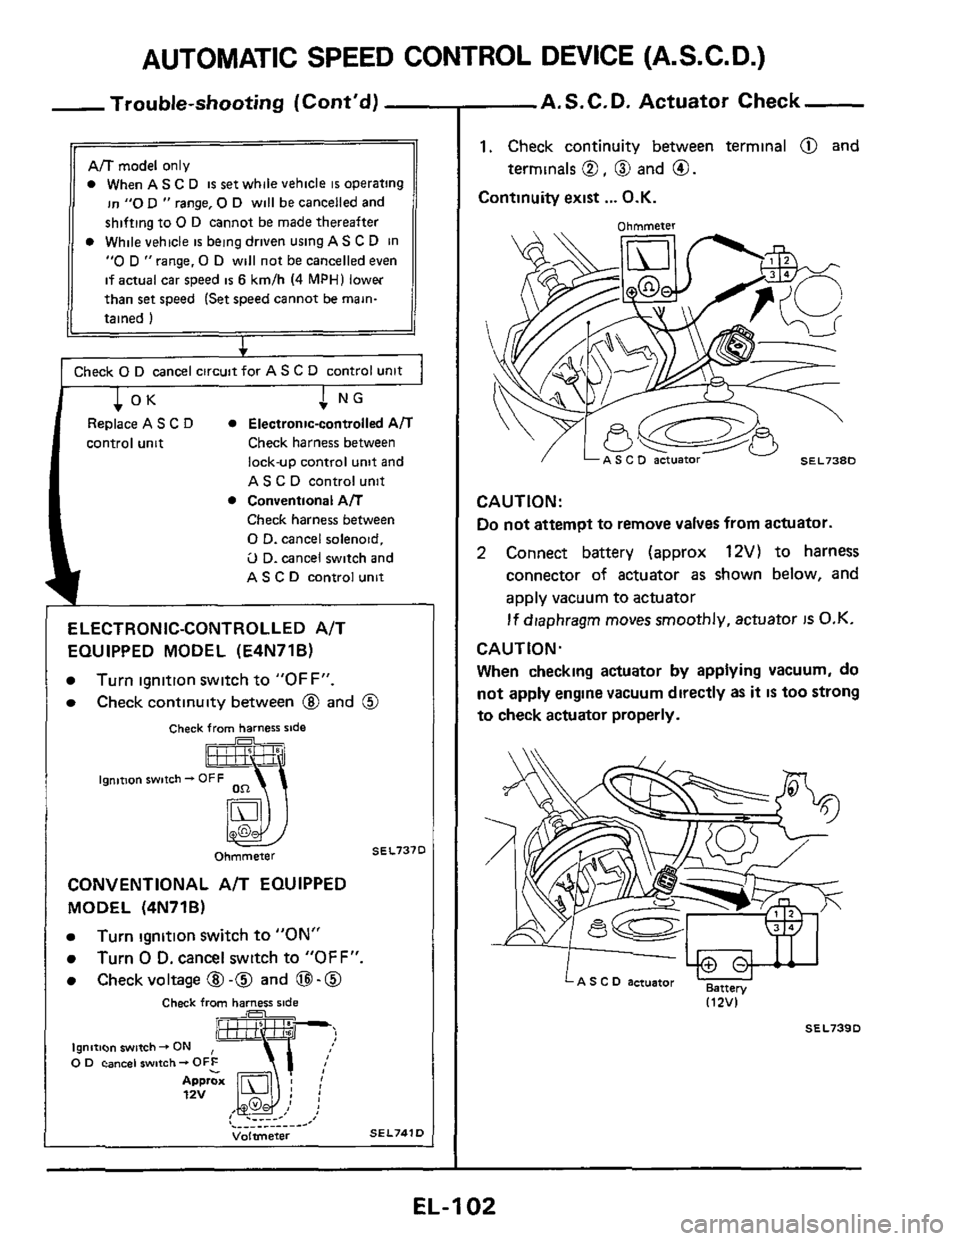 NISSAN 300ZX 1984 Z31 Electrical System User Guide AUTOMATIC SPEED  CONTROL  DEVICE (A.S.C.D.) 
- Trouble-shooting (Contd) 
AIT model only 
0 When A S C D is set while vehicle is operating 
in 
"0 D " range, 0 D will  be cancelled  and 
shifting  to 